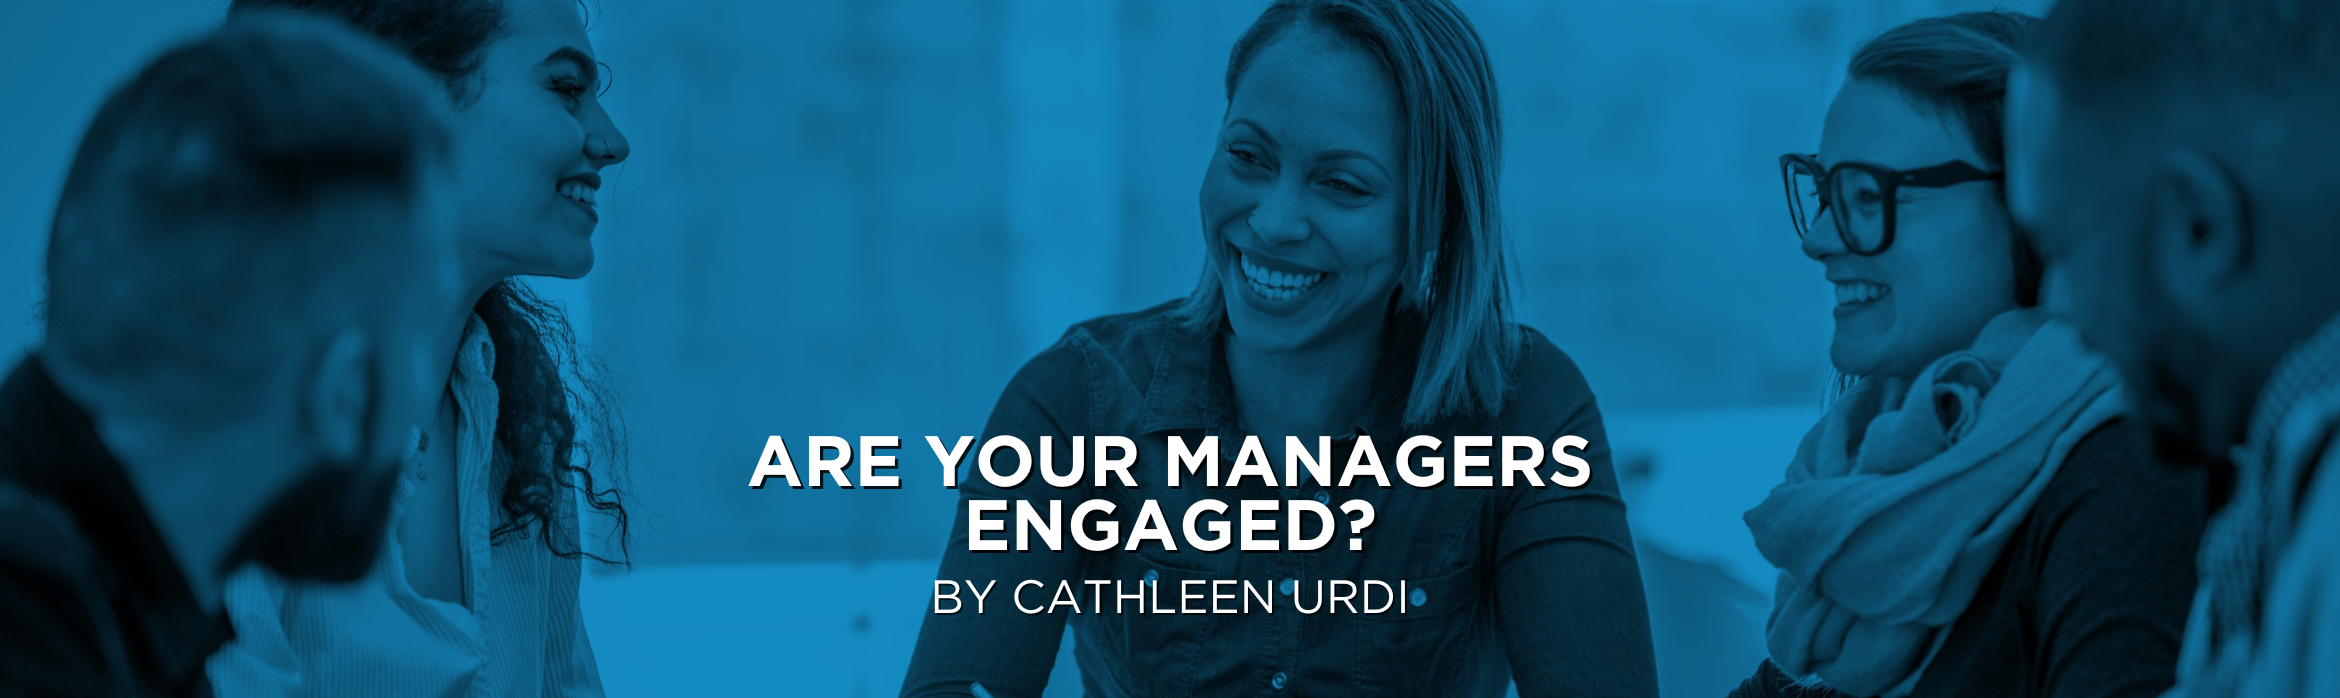 Are your managers engaged?